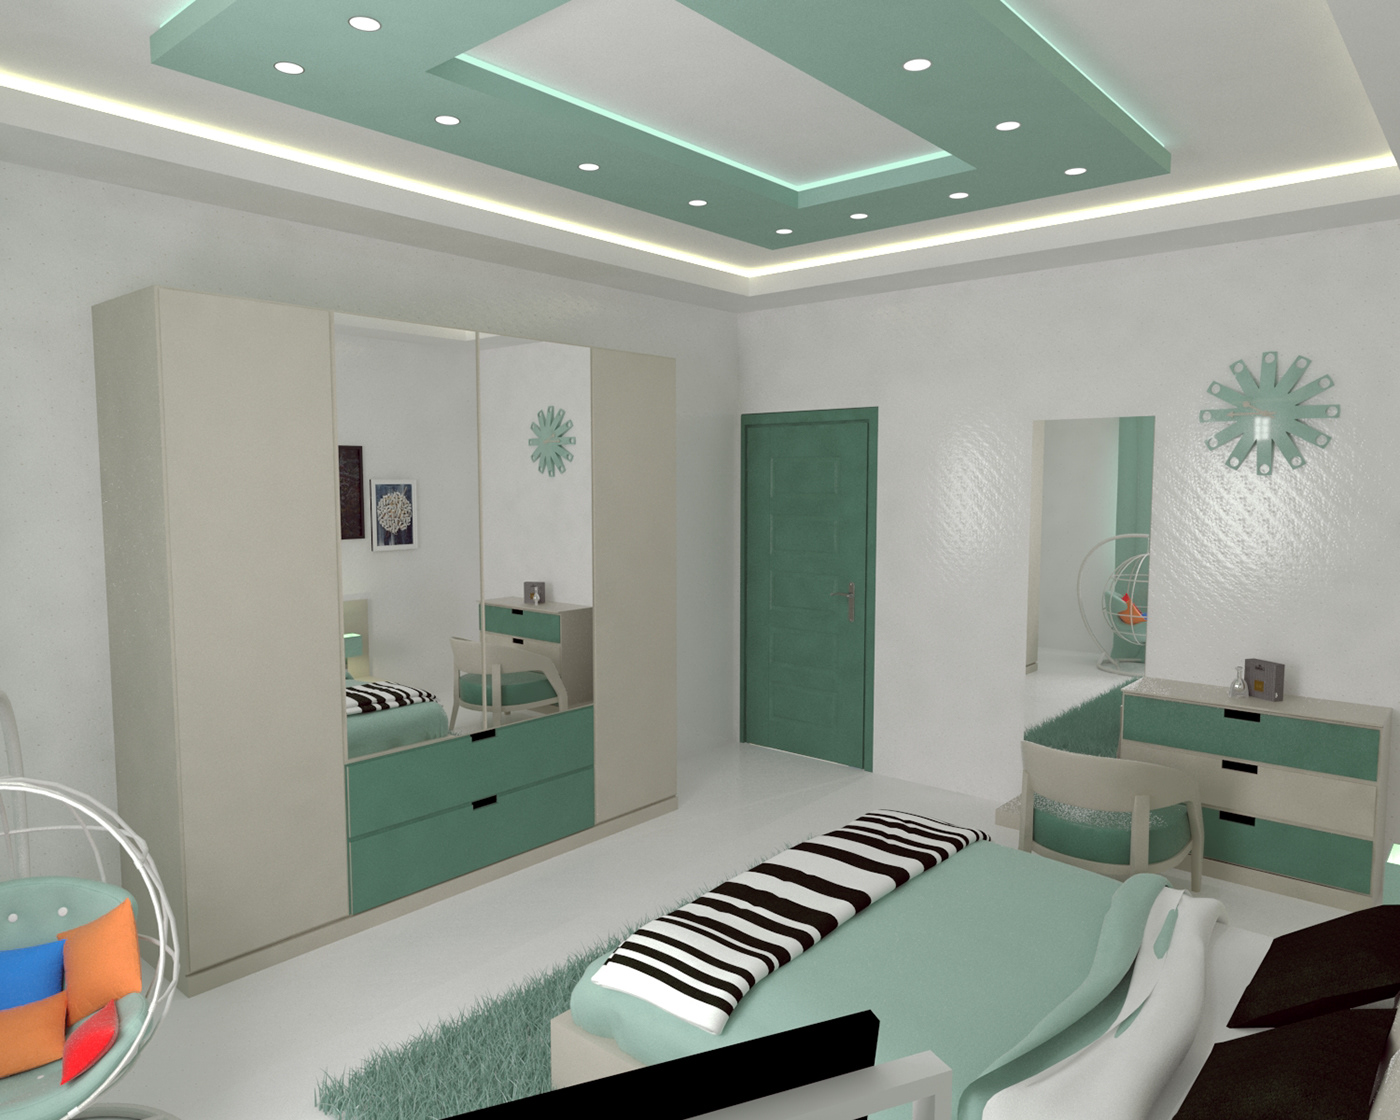 Modern white bedroom with light green for rendering #modern #bedroomdecor #bedroom #art #architecture #instagood